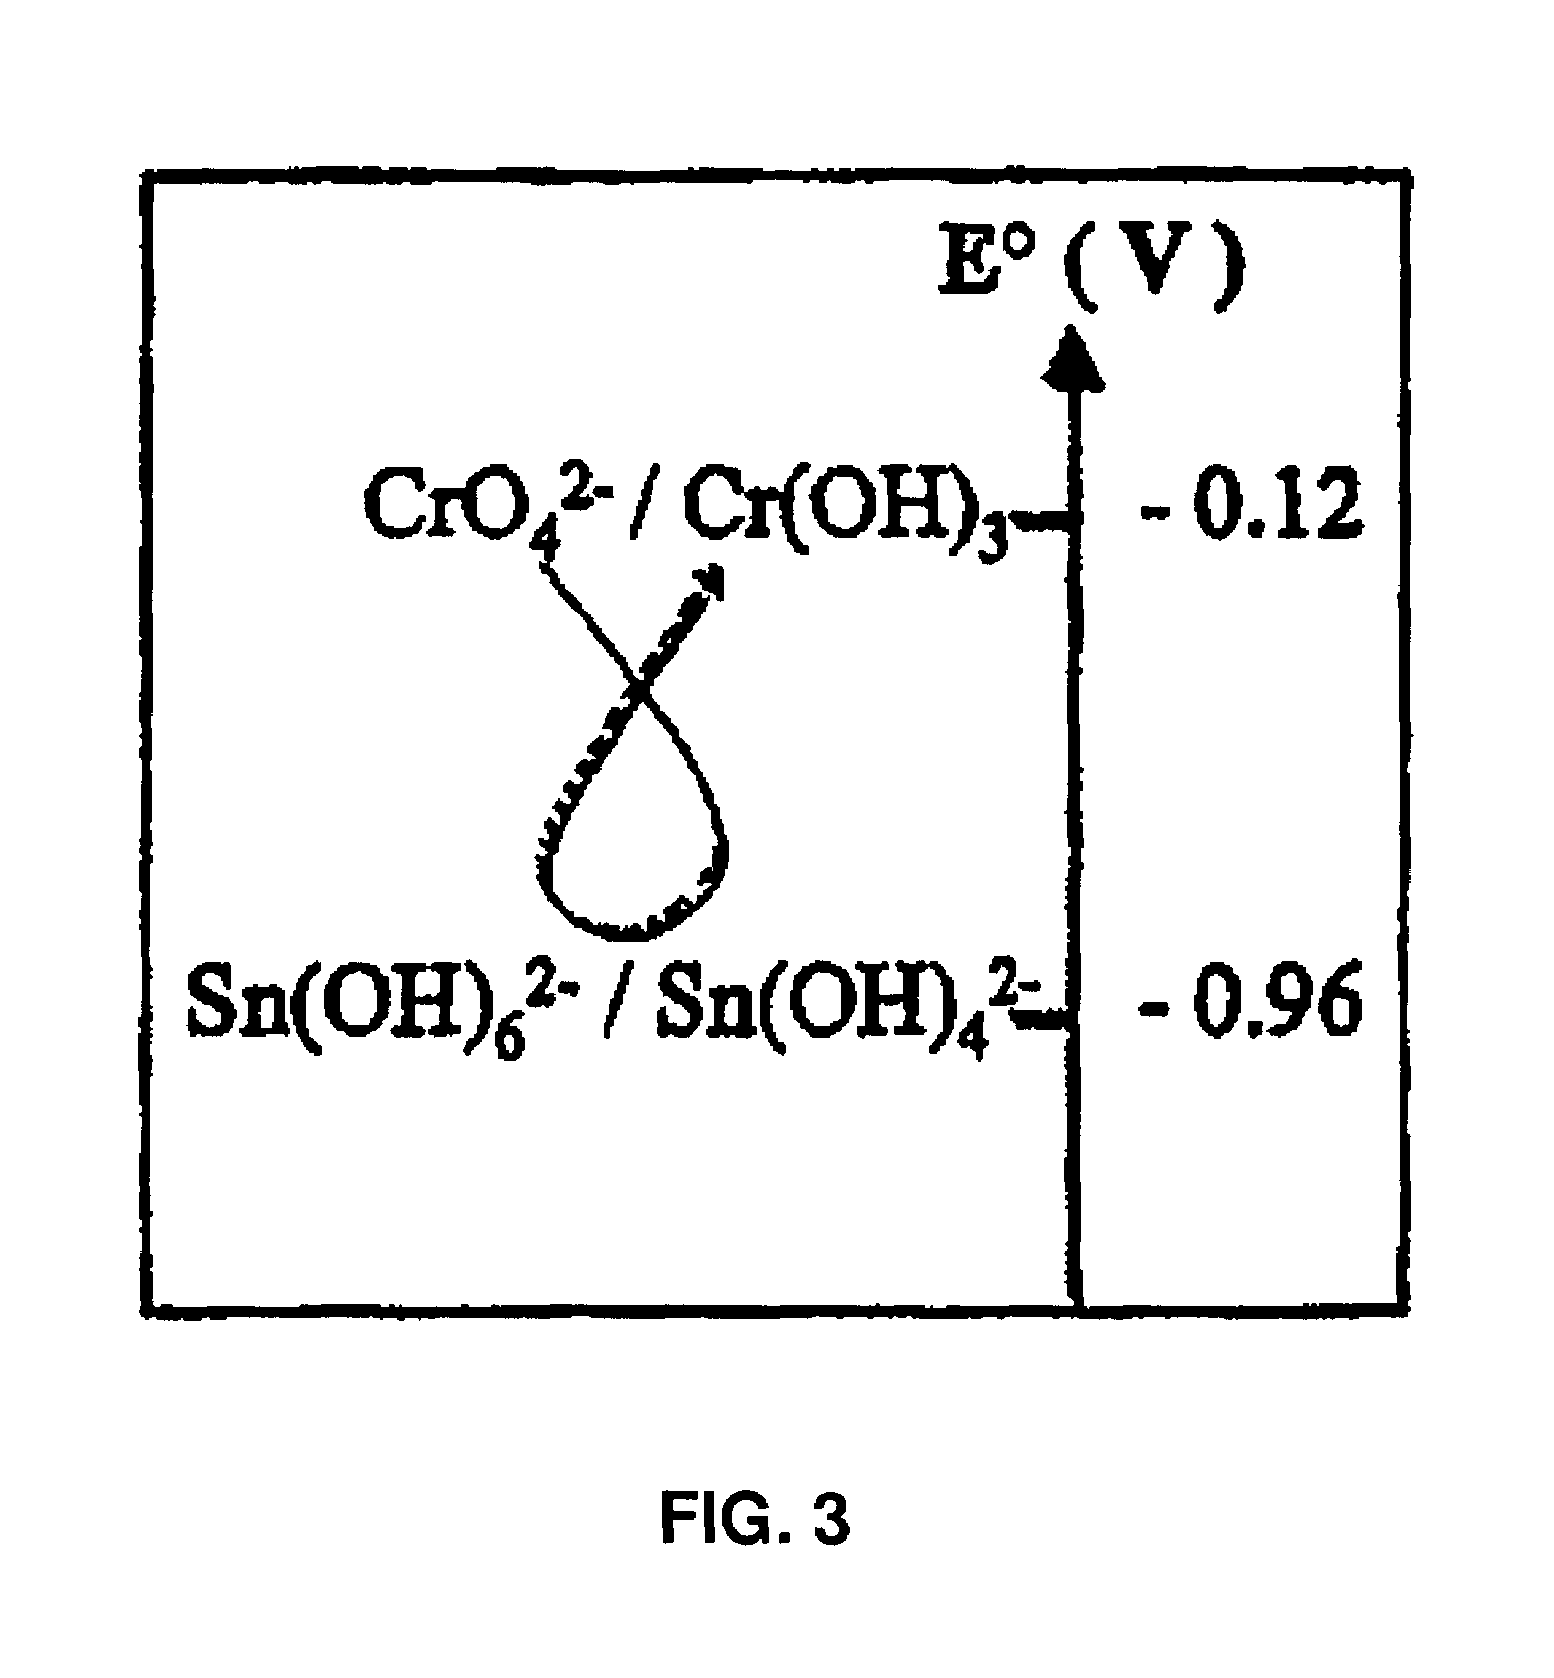 Colloidal hydroxide aqueous suspension of at least one transition element serving to reduce chrome in cement